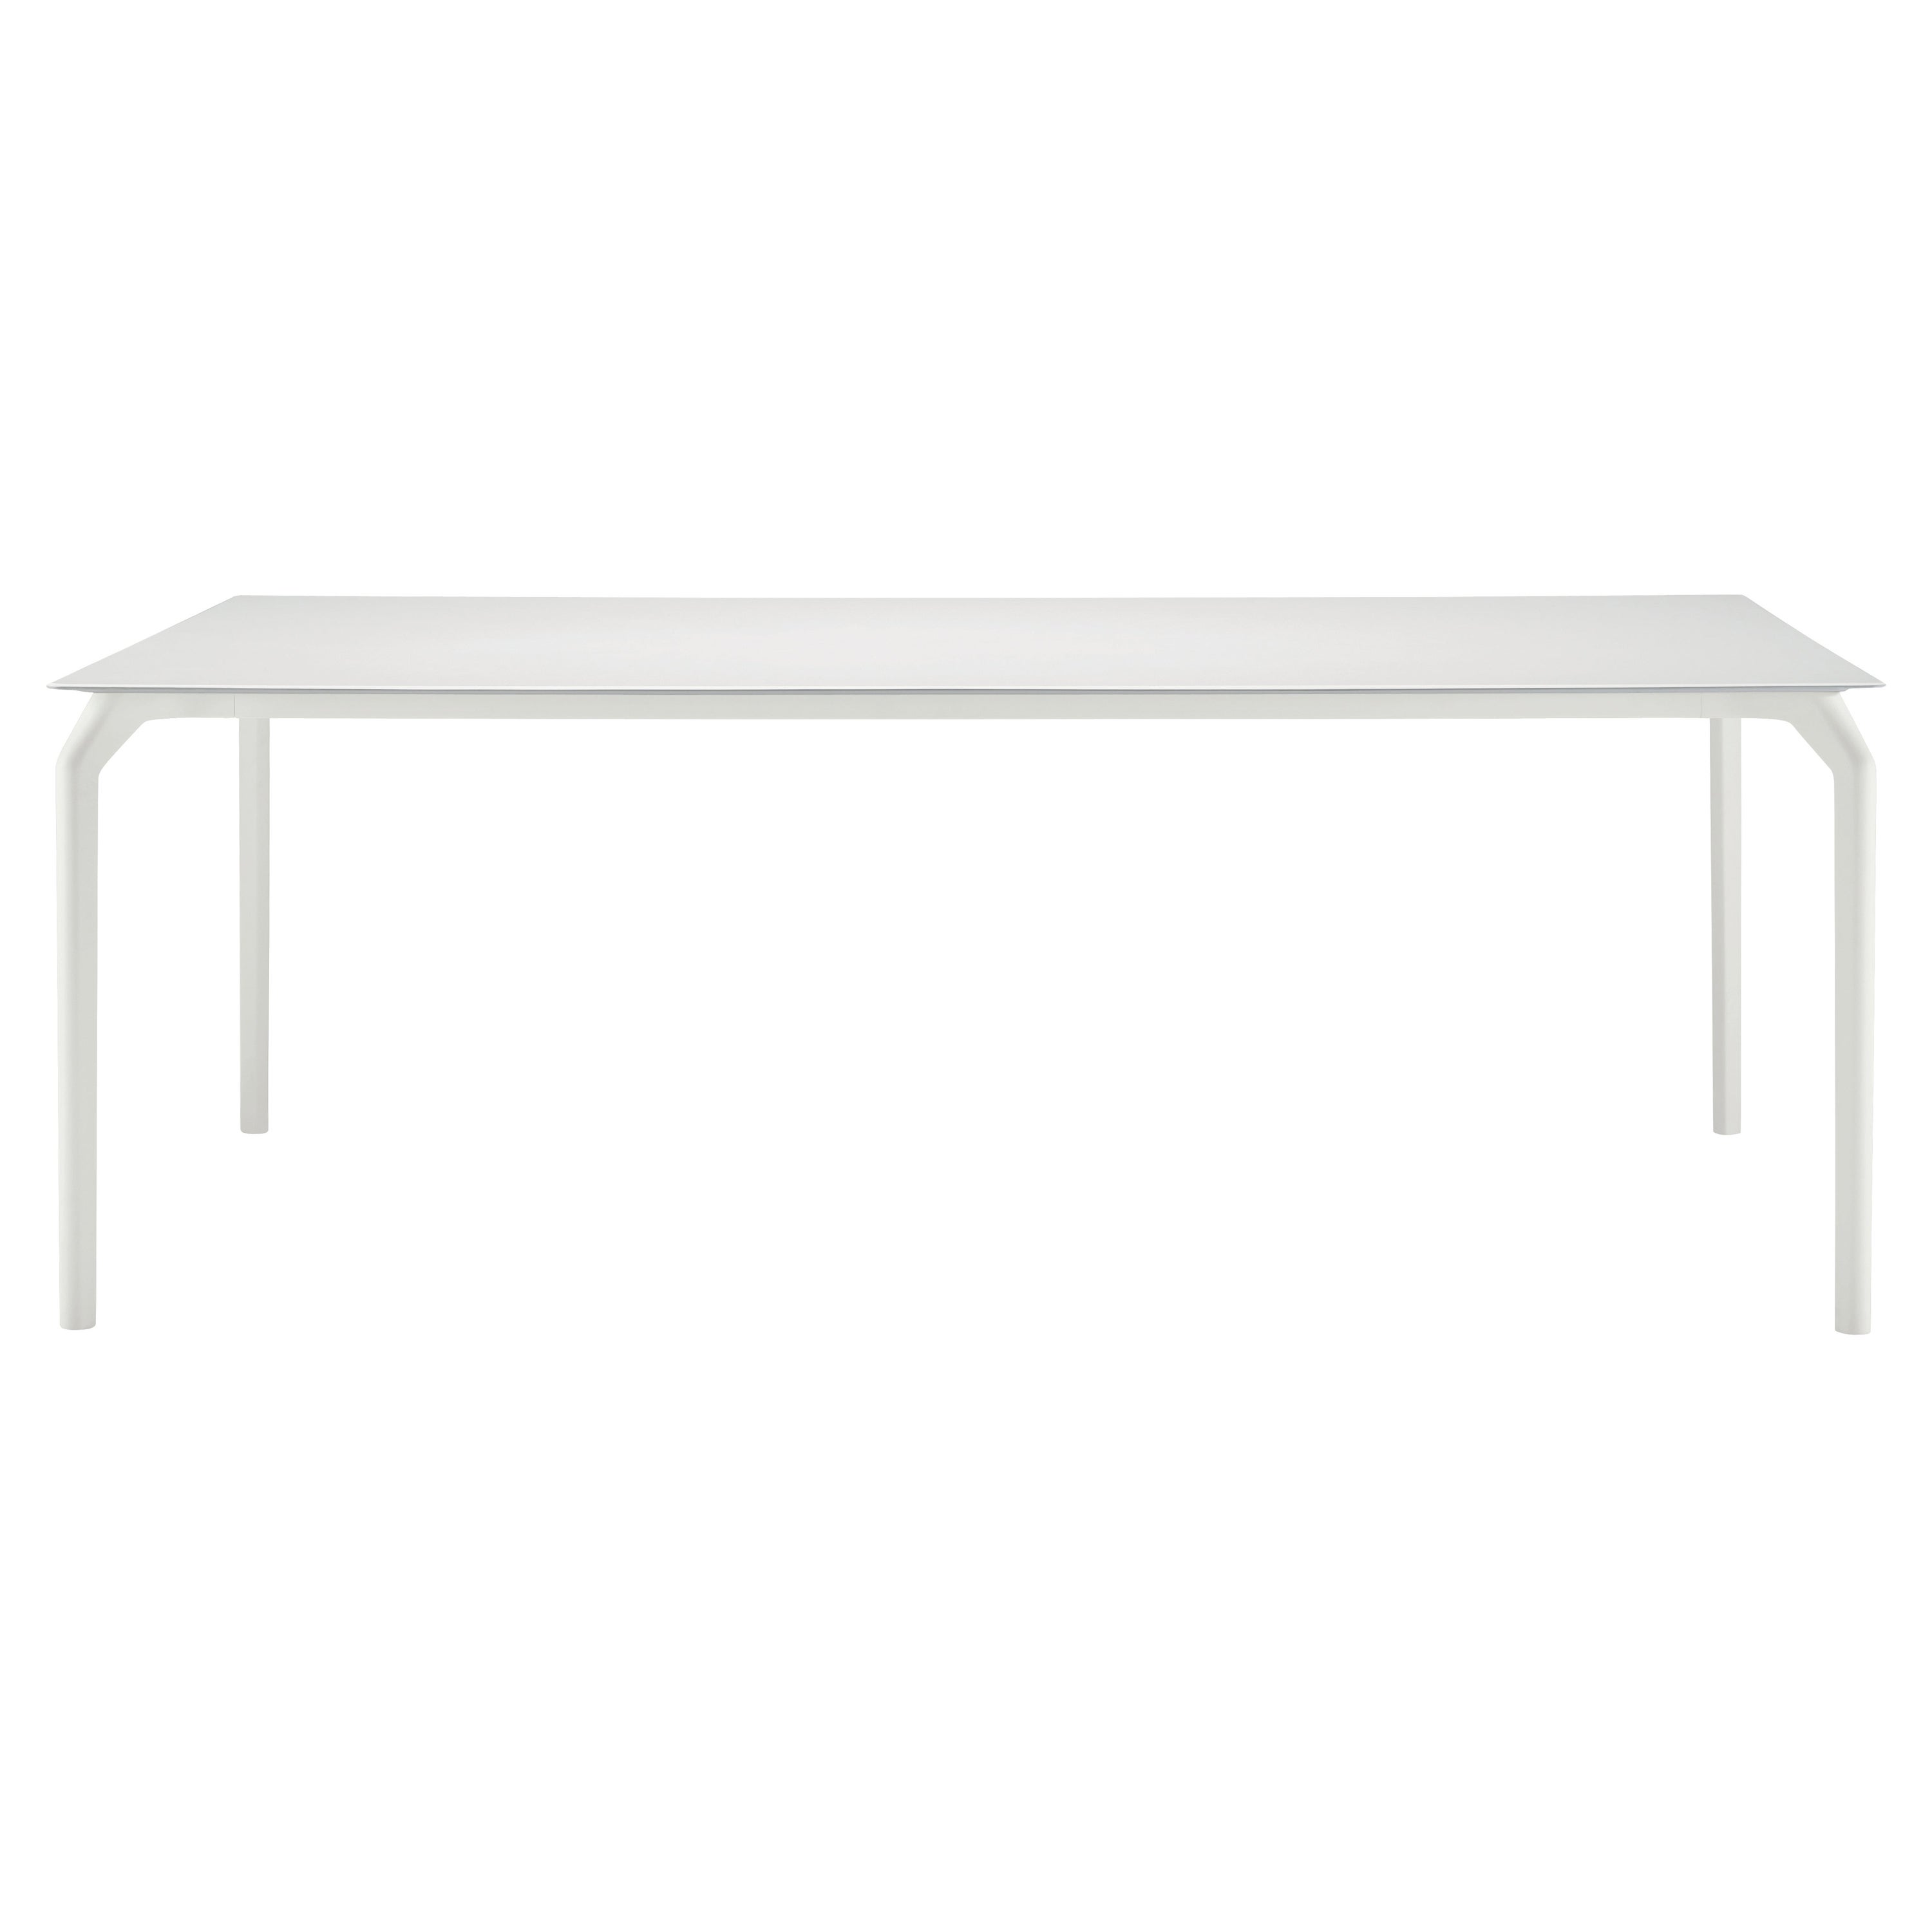 Alias Small 632 TEC 1000 Table in White with Lacquered Aluminum Frame For Sale